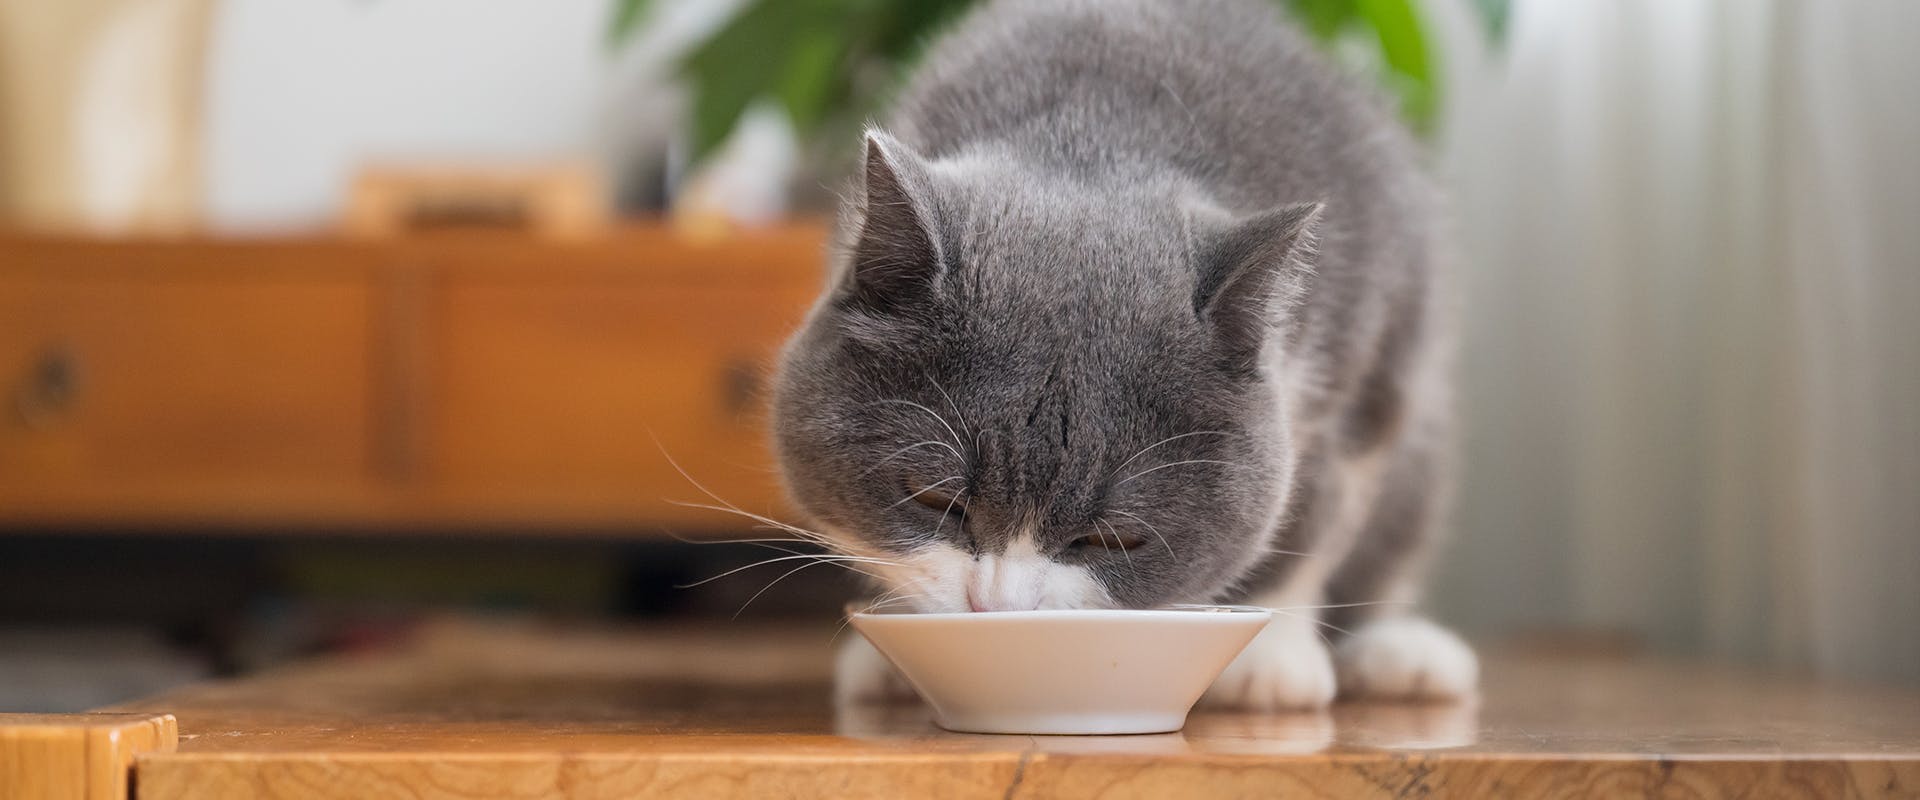 A cat eating from a white cereal bowl